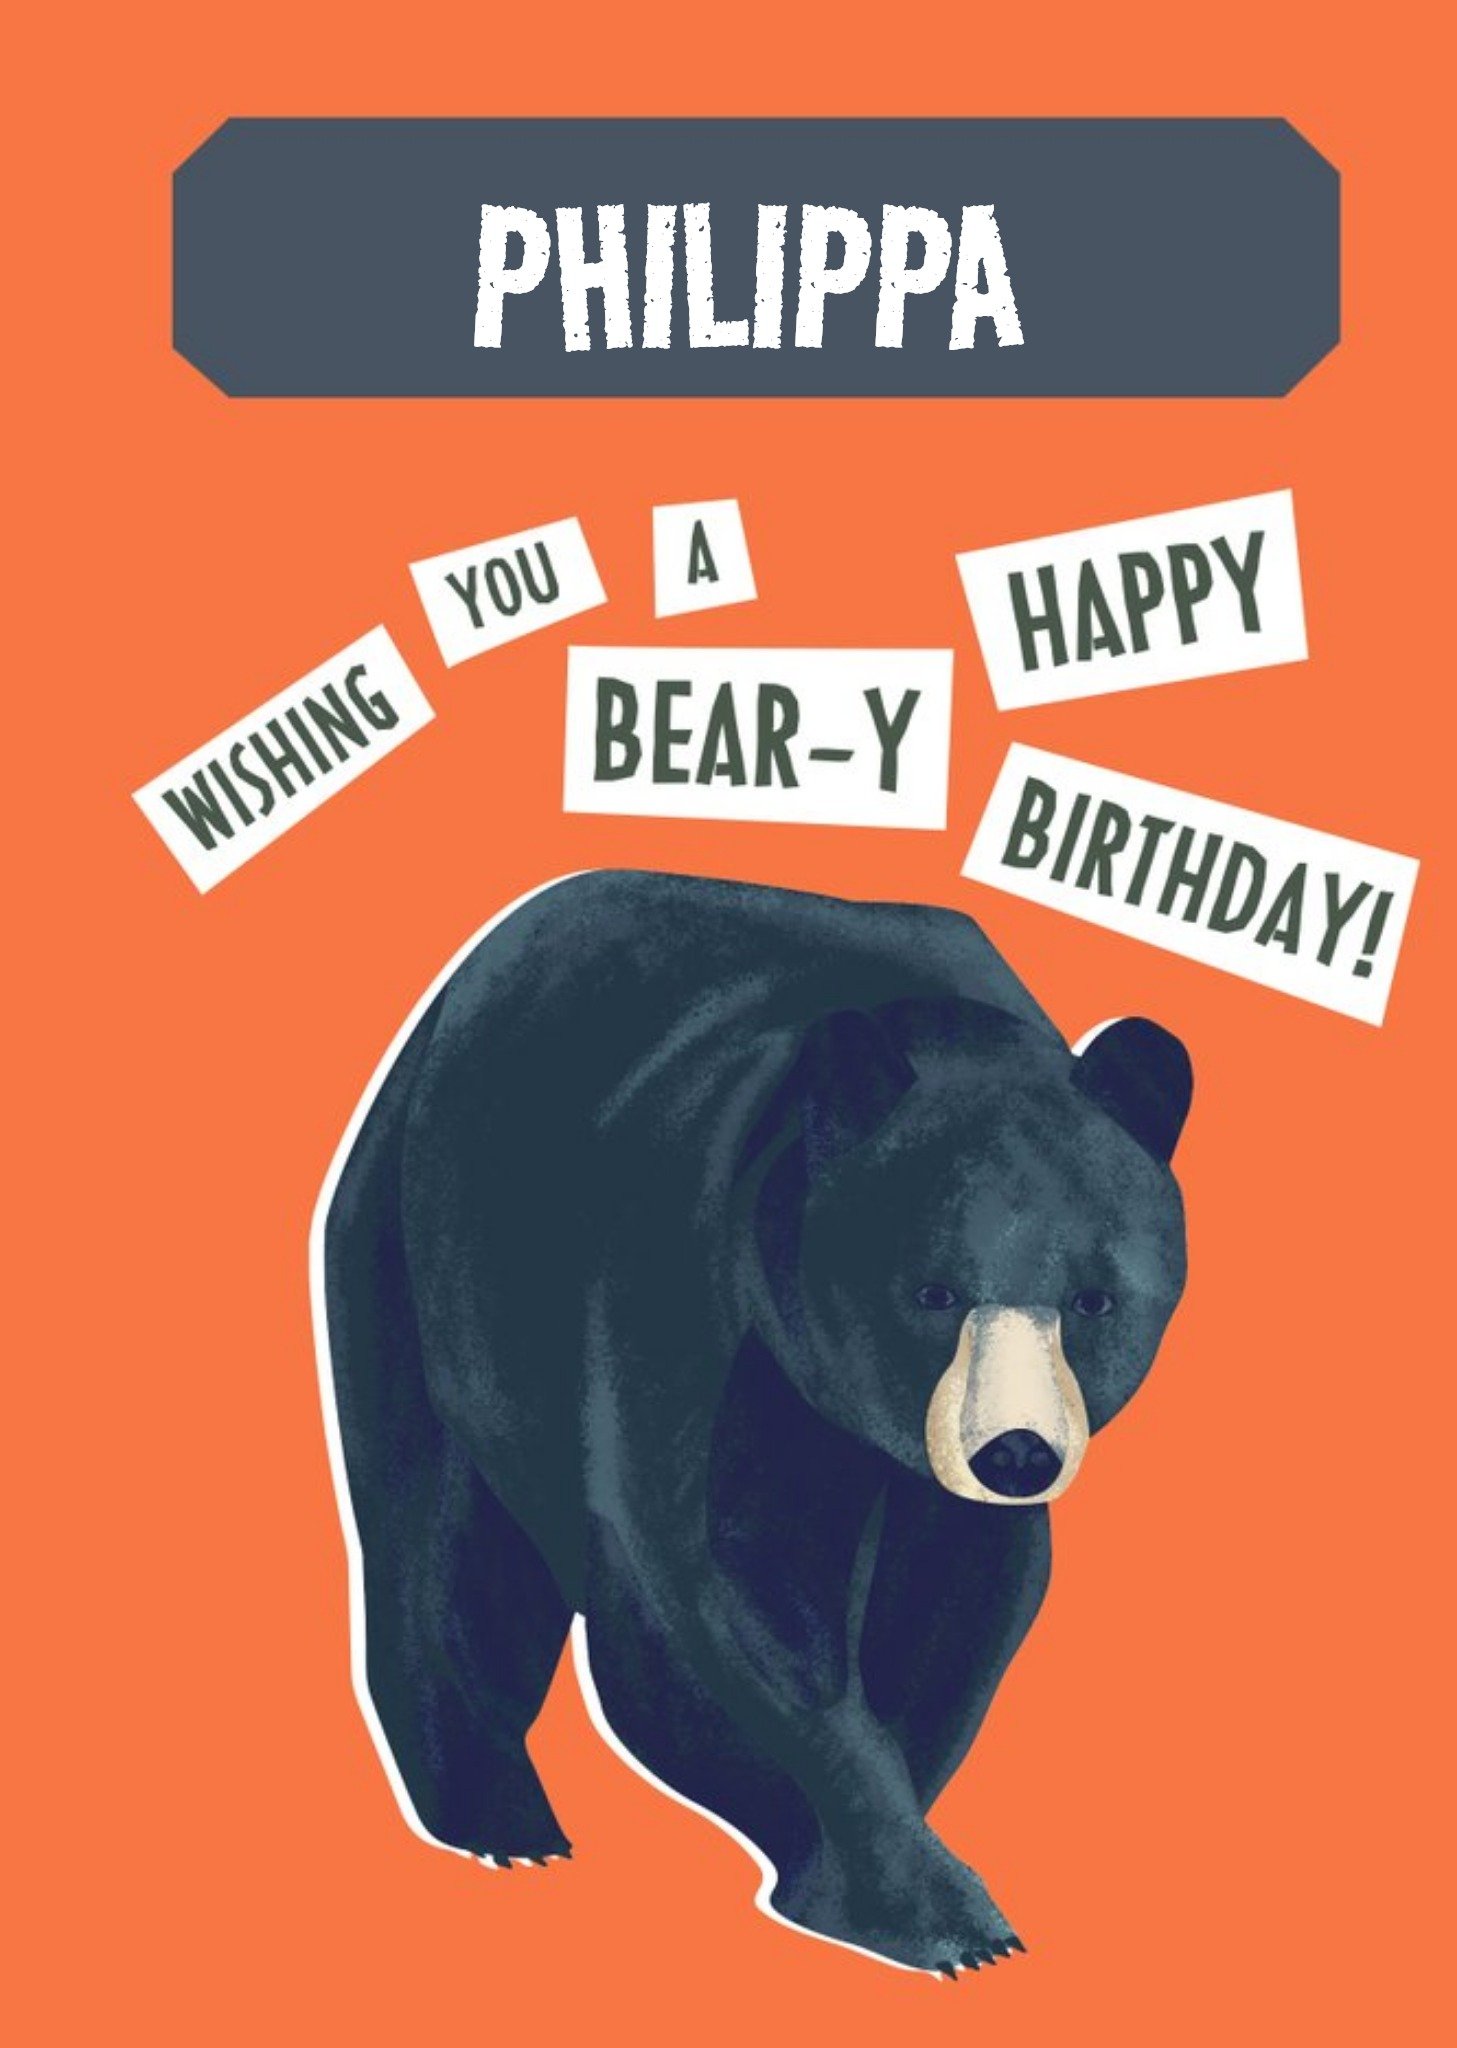 The Natural History Museum Natural History Museum Wishing You A Bear-Y Happy Birthday Card Ecard